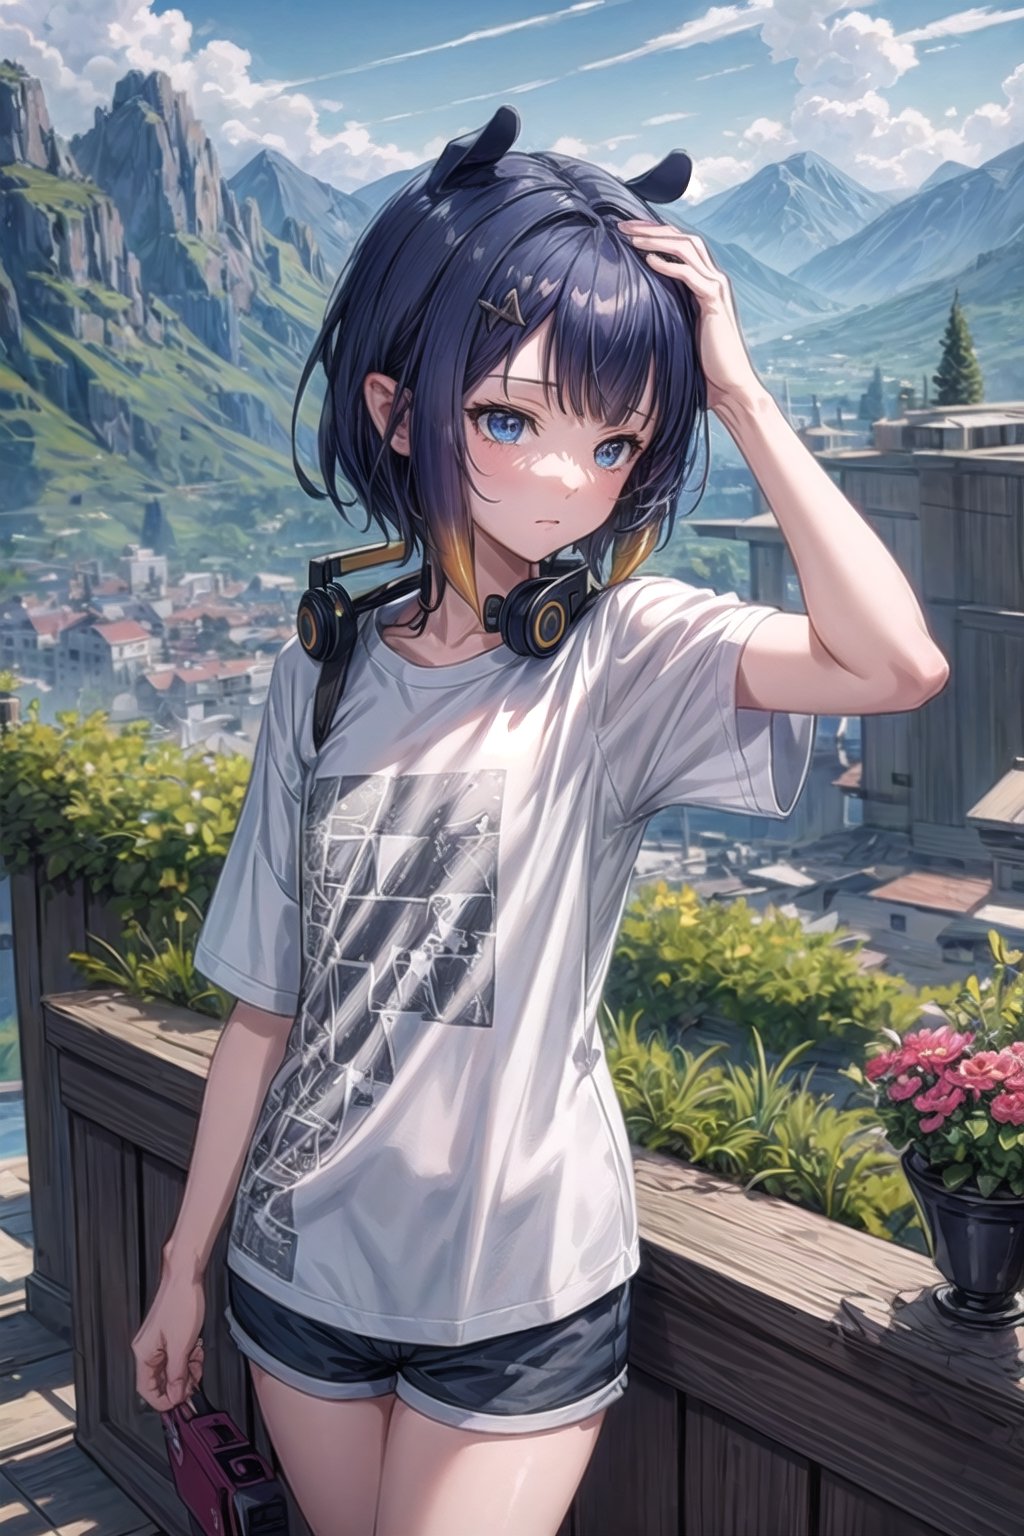 //Quality
(((best quality, 8k wallpaper))), ((detailed eyes, detailed illustration, masterpiece, ultra-detailed)),

//Charater
1girl, solo, ninomae ina'nis, bangs, inacasual, white t-shirt, short shorts, short hair, headphones

// Pose
profile, in_profile, upper body, (dynamic angle), 

// Background
balcony scenery, blue cloudy sky scenery, plants and flowers, mountains scenery